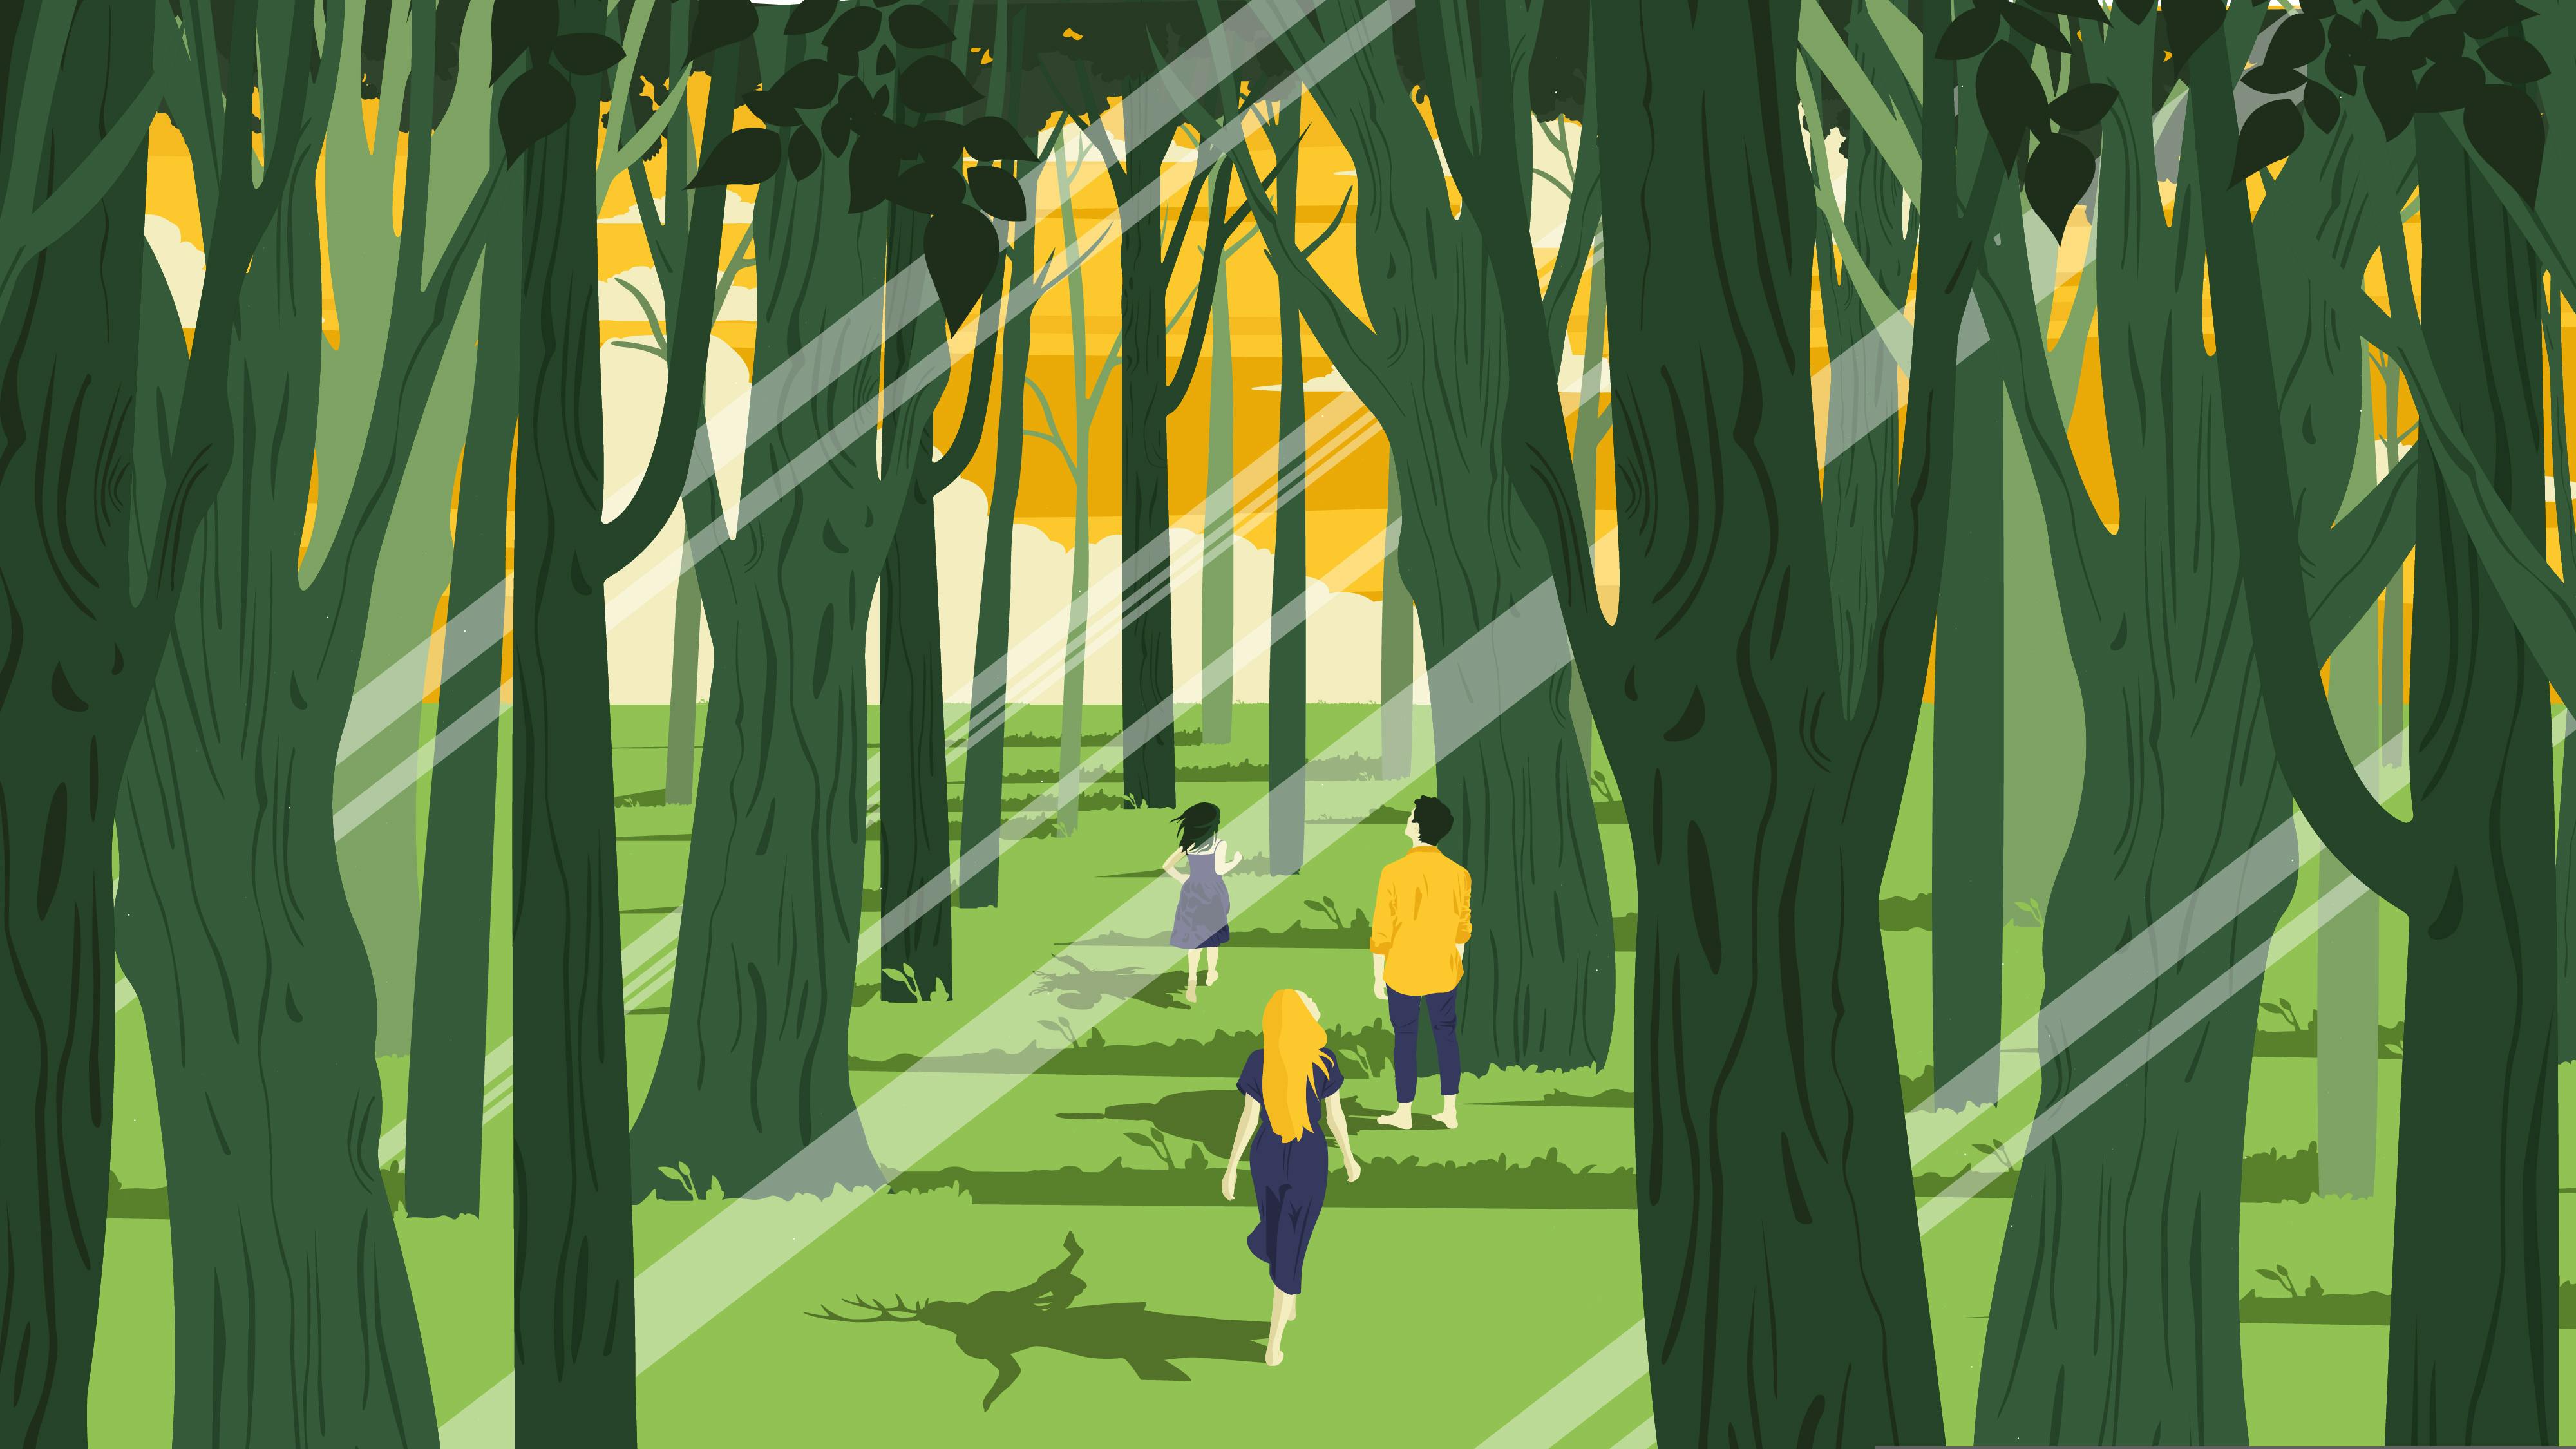 The illustration depicts a forest at sunset. Three young figures are walking through it; they are looking towards the horizon, we see their backs. The shadows they cast on the ground reveal enchanted beings, somewhere between ritual and magic.